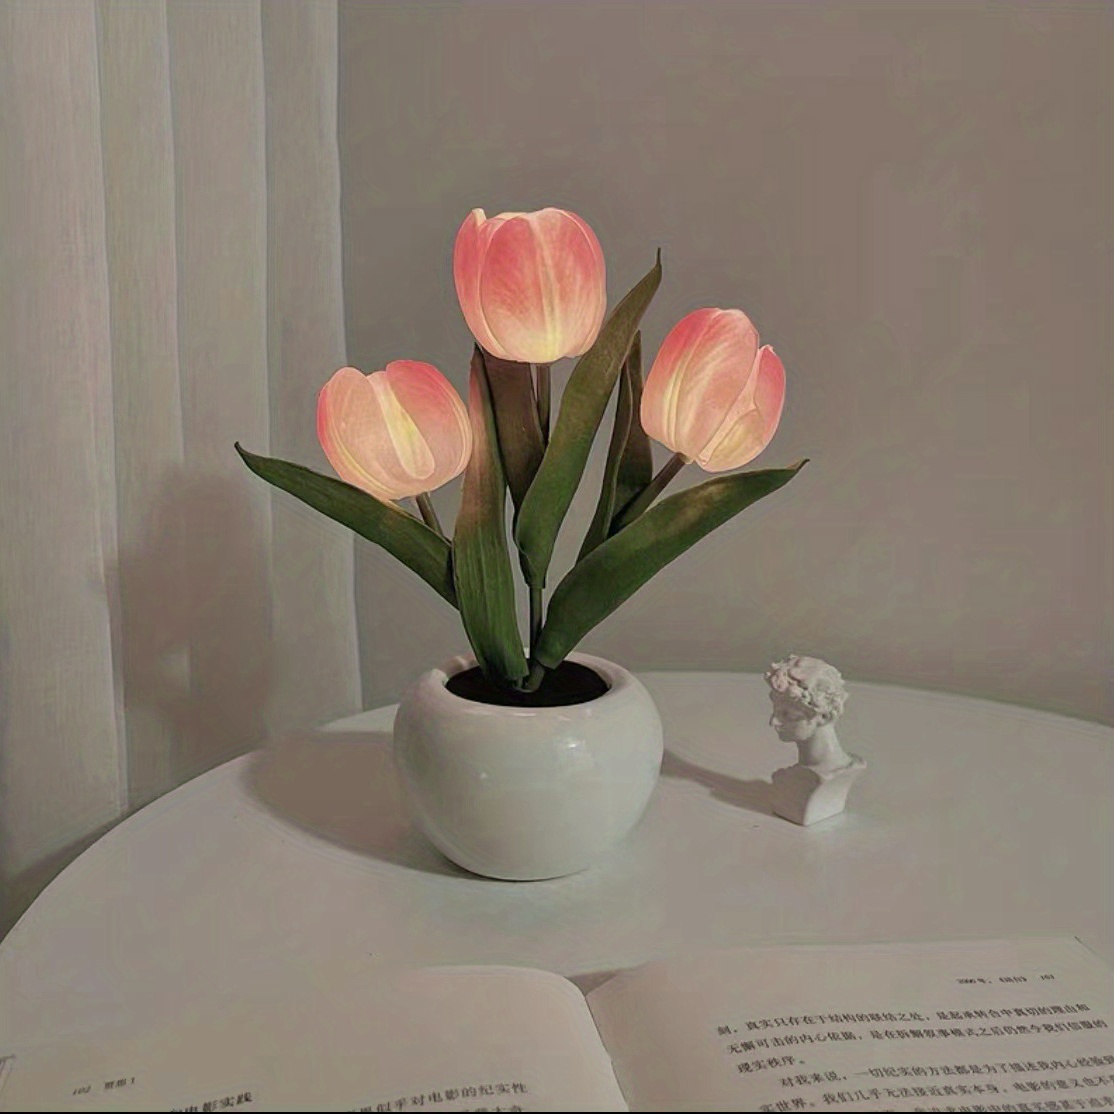 LED Tulip Night Light, Plug-in Bouquet Imitation Light, Bedroom Decoration Atmosphere Table Lamp, For Bedroom, Ornaments, Birthday Gifts